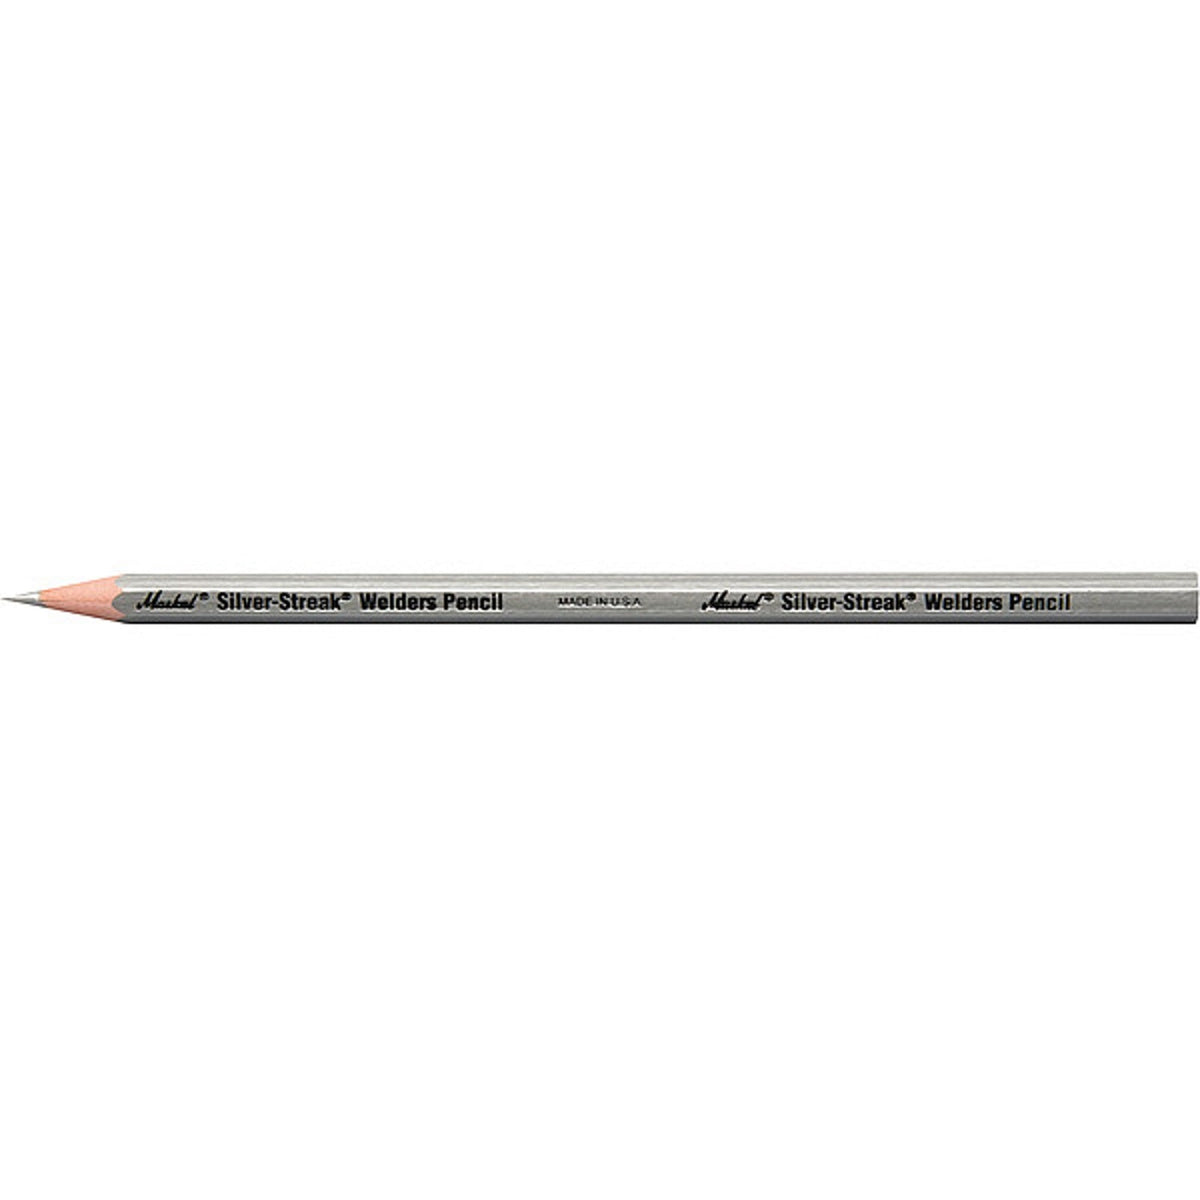 OIAGLH Silver Streak Welders Pencil With 36 Pcs Round Silver